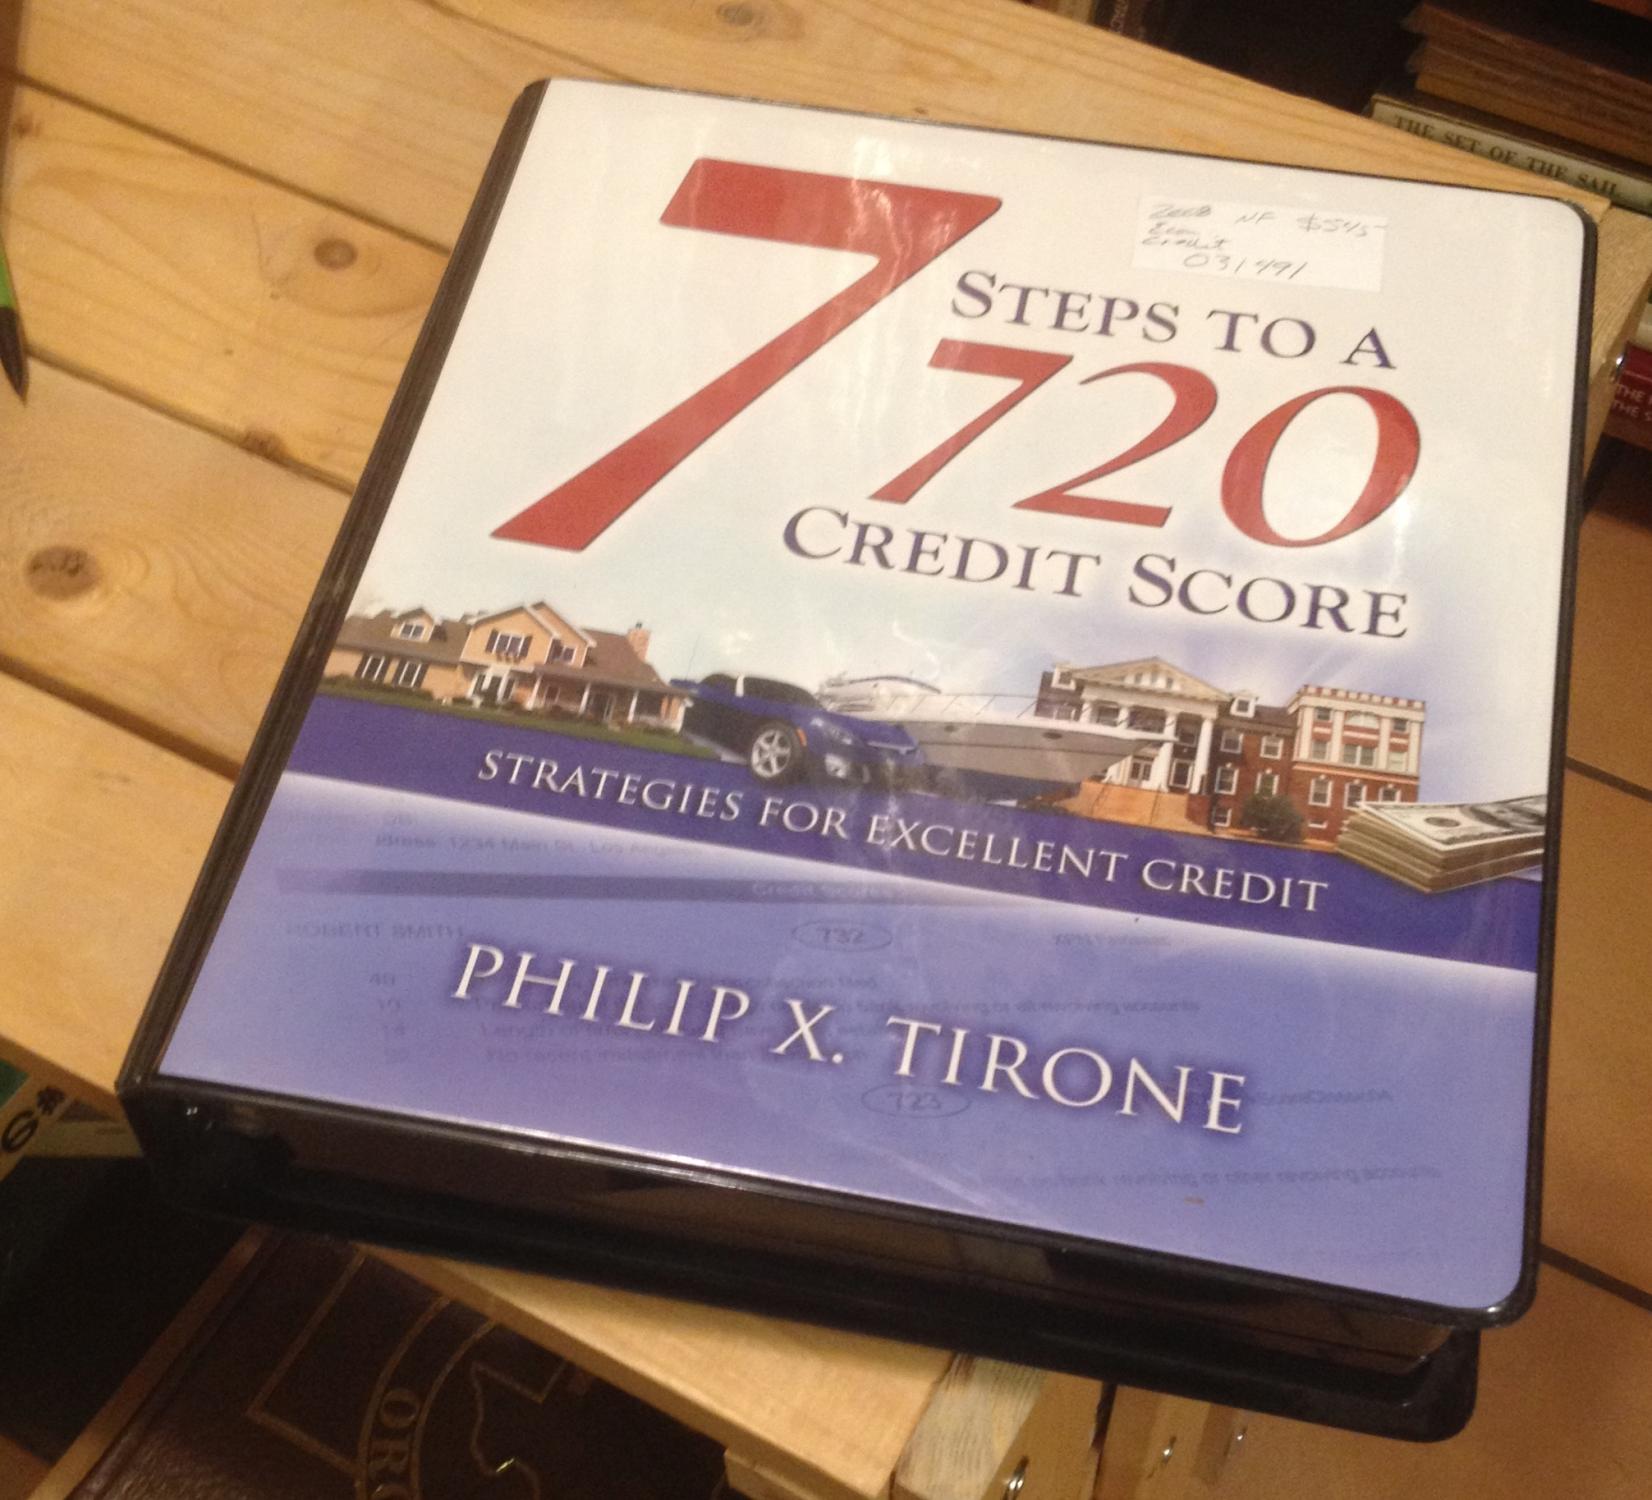 7 Steps to a 720 Credit Score Strategies for Excellent Credit